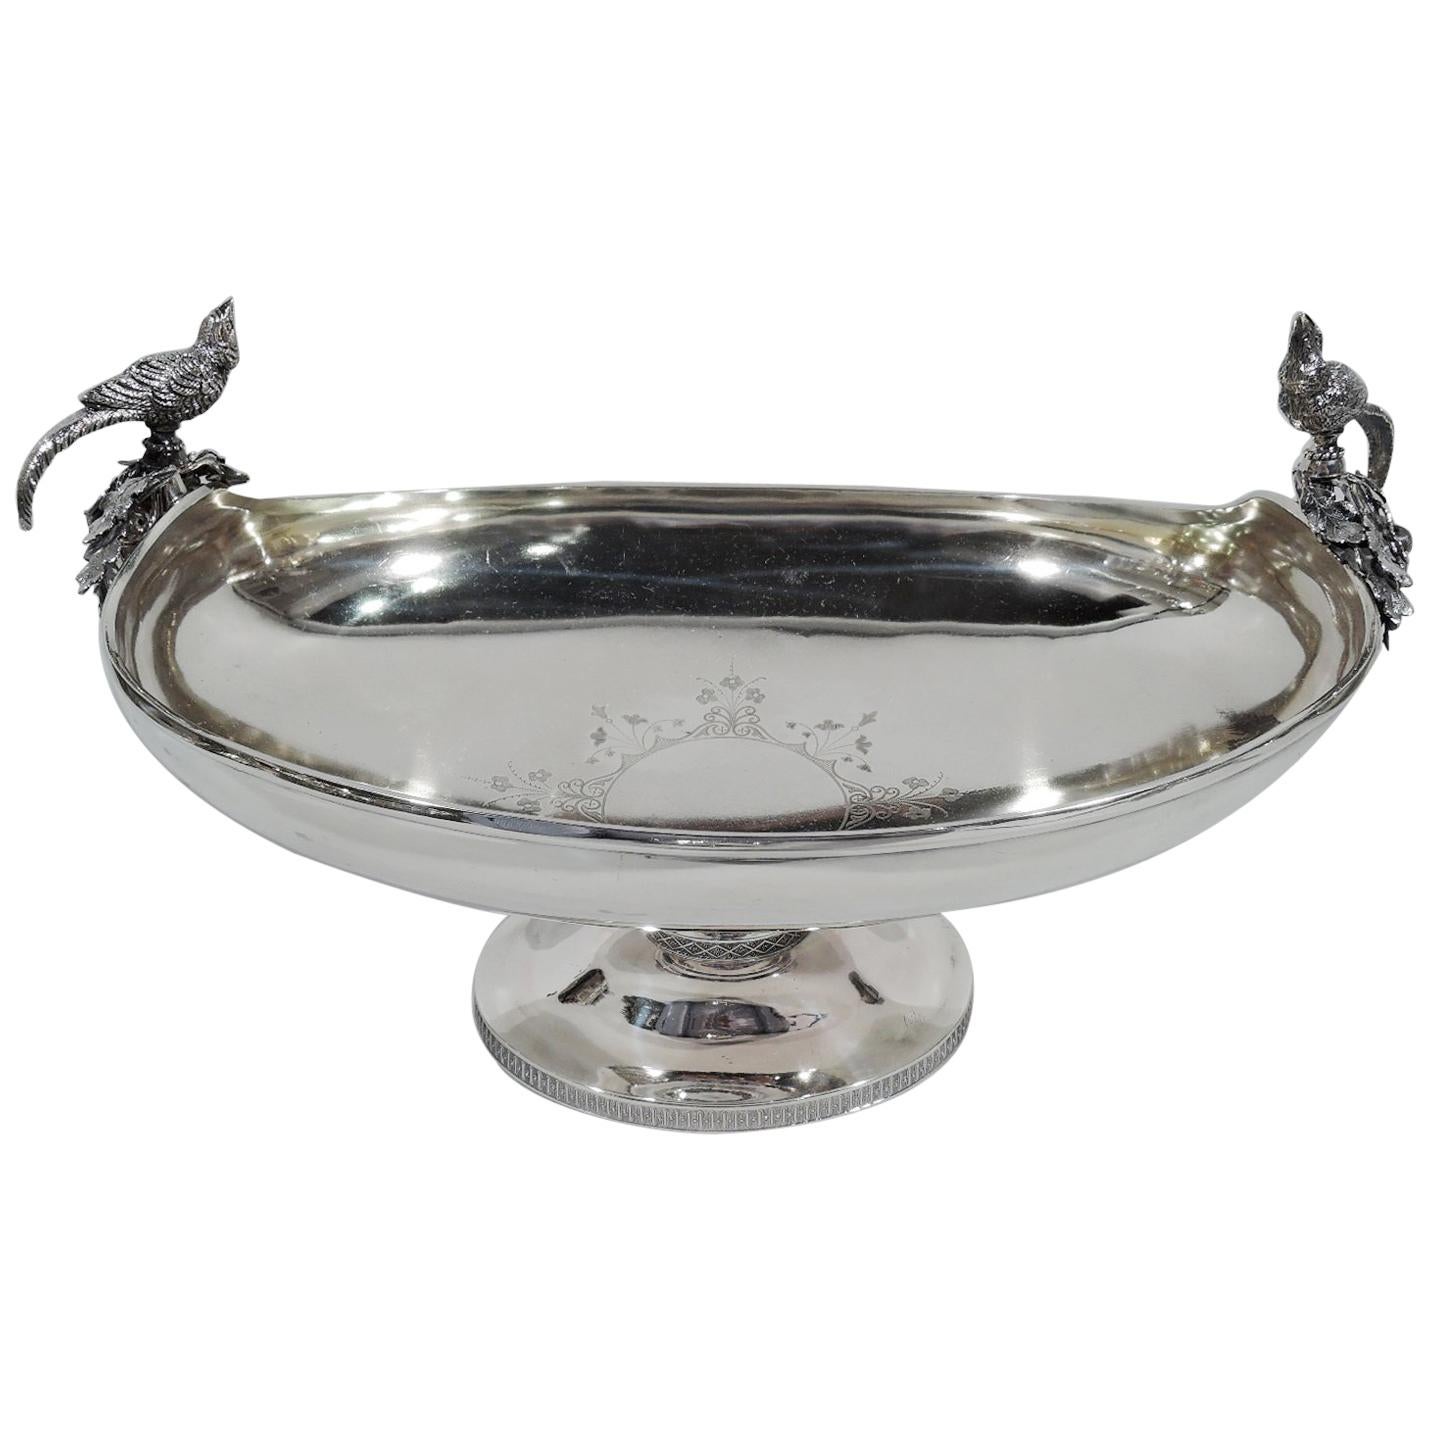 New York Aesthetic Sterling Silver Centrepiece Bowl with Birds